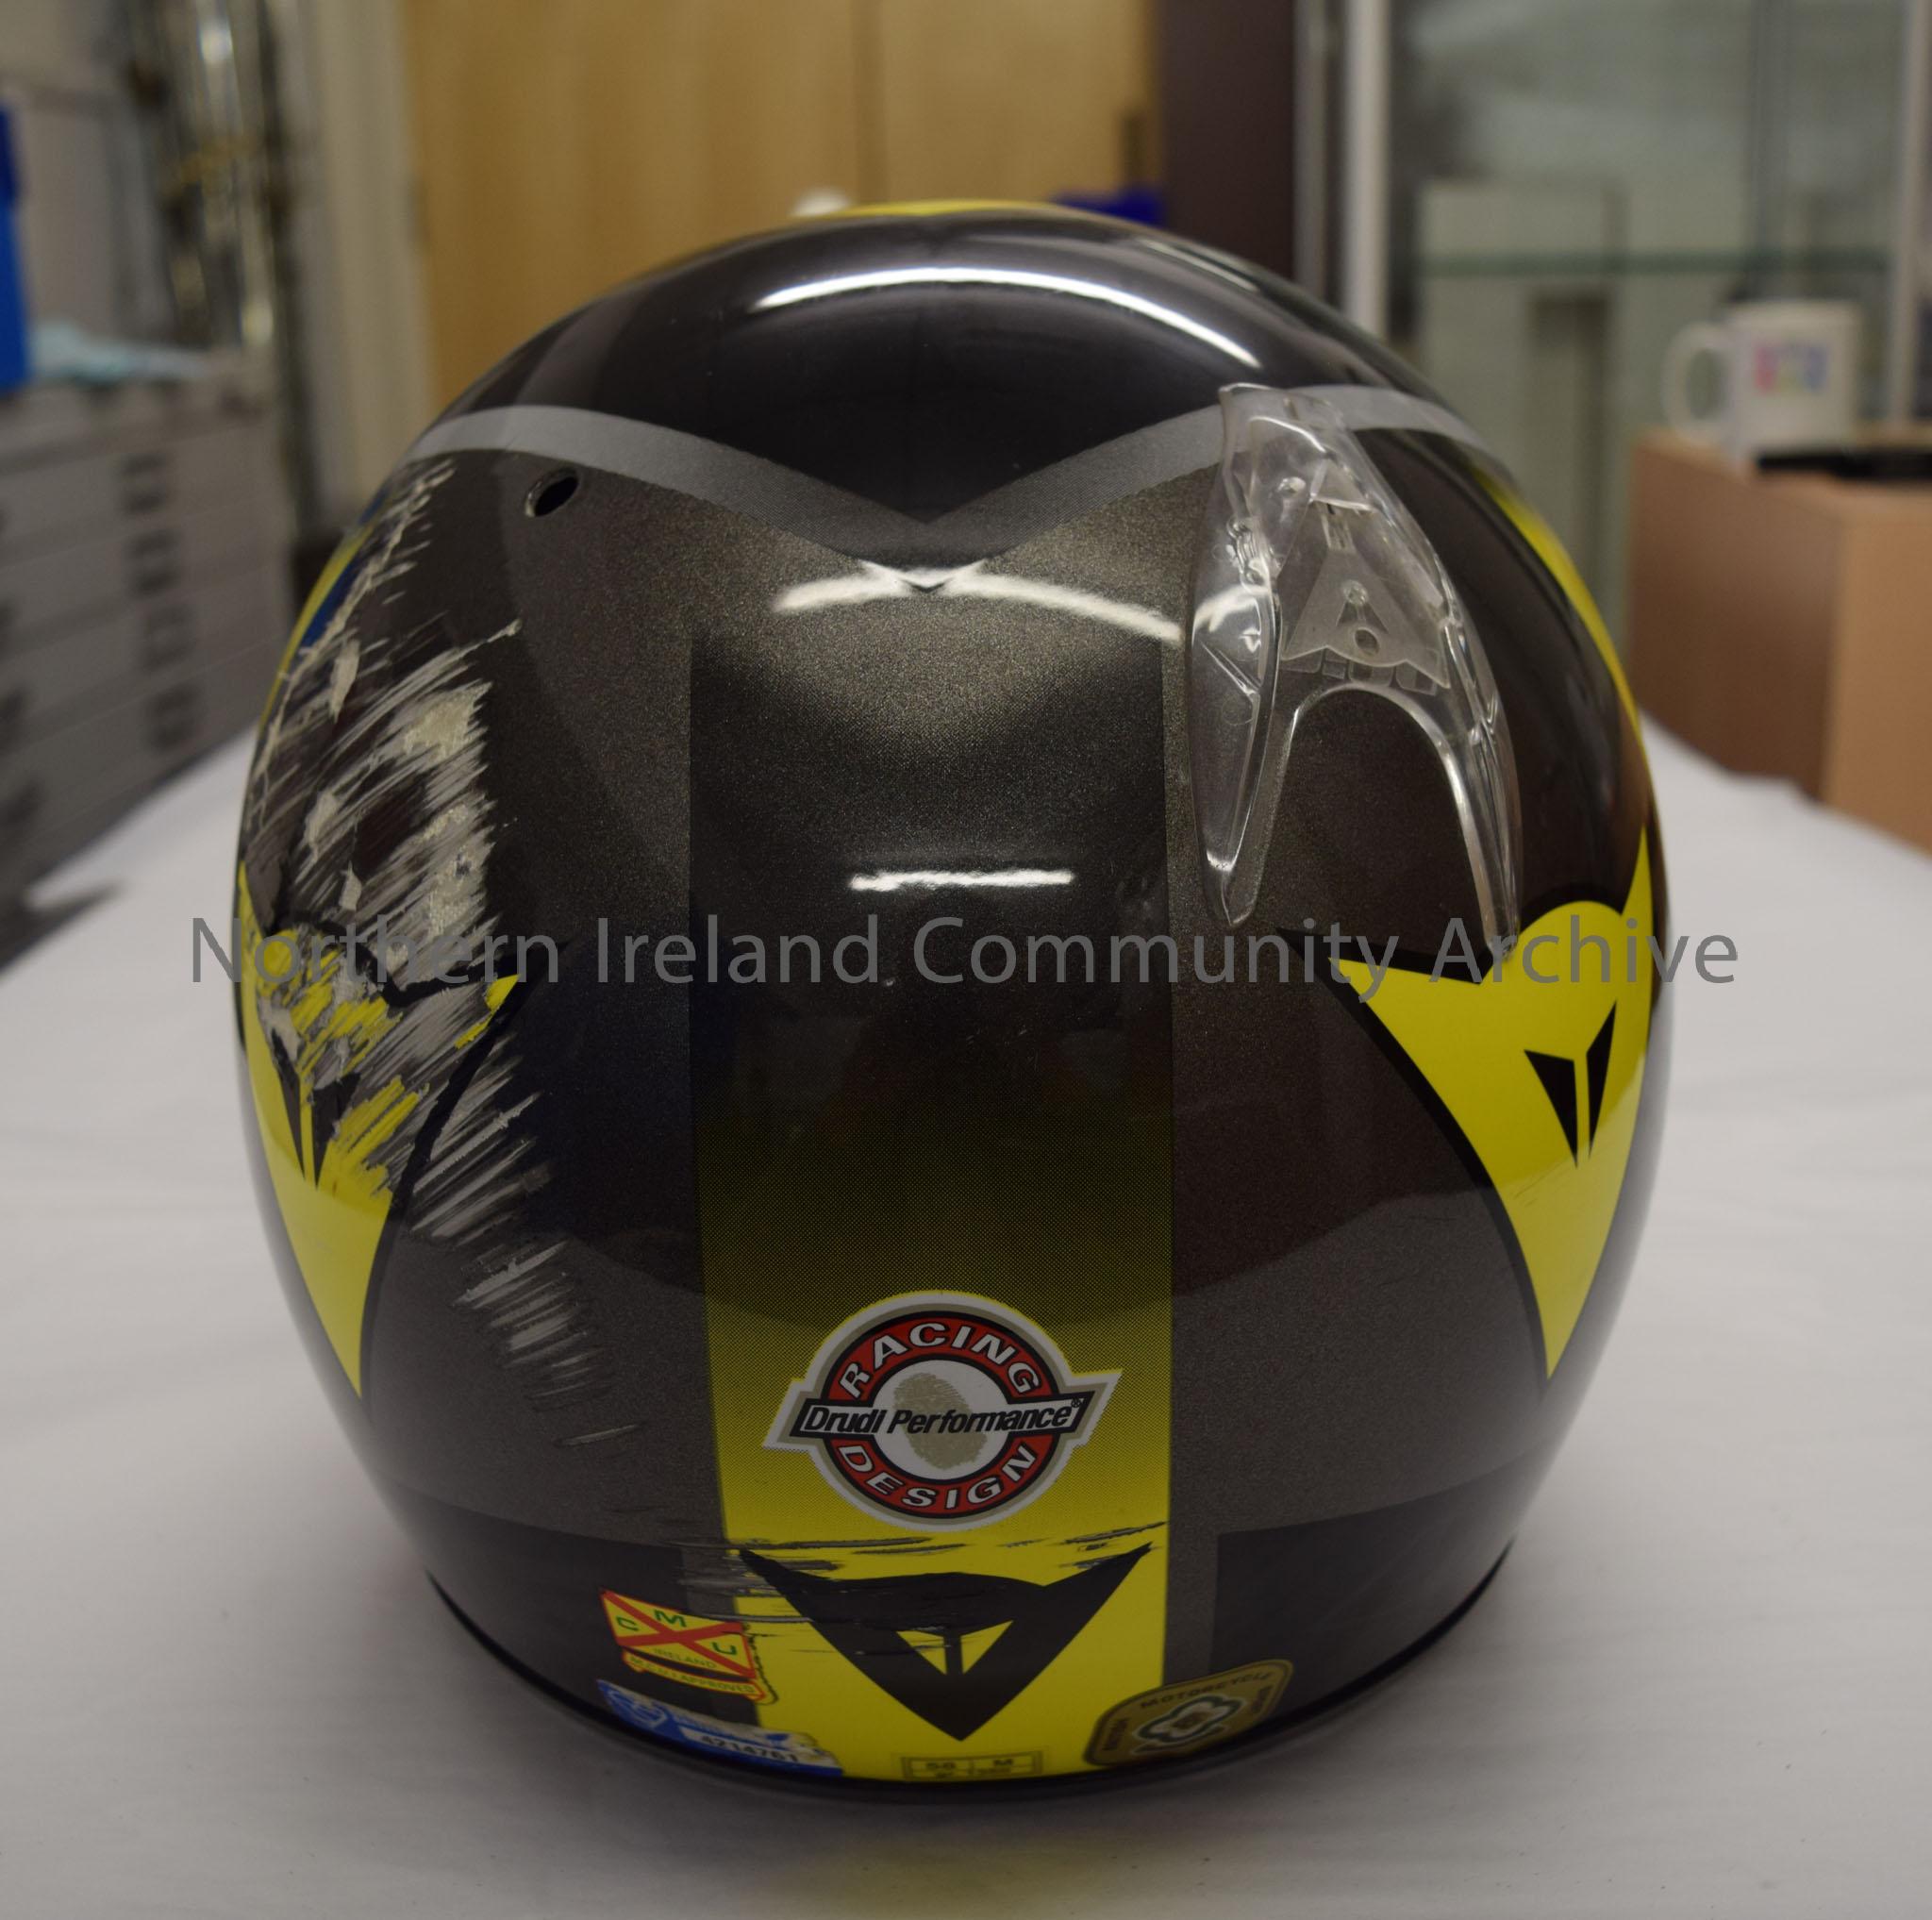 Dainese motorcycle helmet belonging to Raymond Hodge. Black, silver and yellow helmet with black visor and triangular shaped logo on the front. – 2016.12 (4)